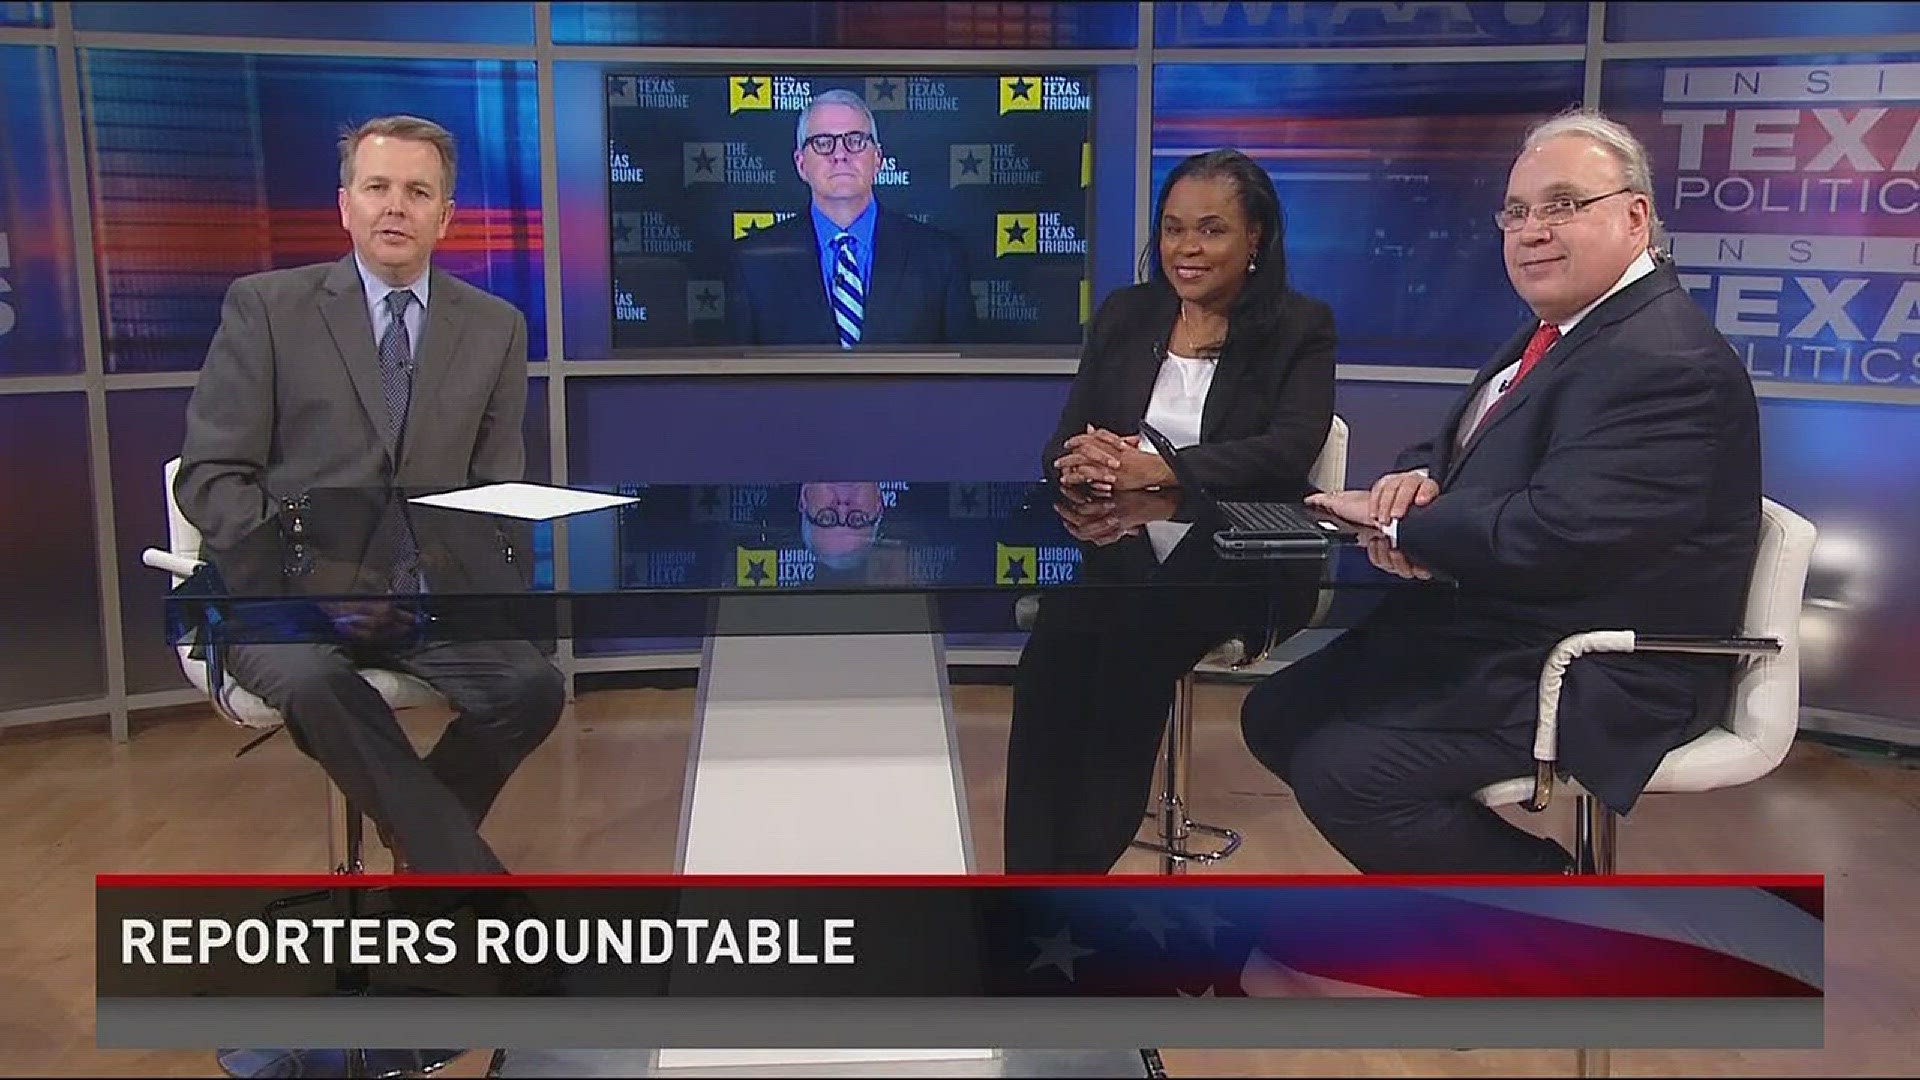 Reporter's roundtable puts the headlines in perspective each week. Bud and Ross returned along with Berna Dean Steptoe, WFAA's political producer, to discuss increased turnout by Democrats in early voting, which races are drawing people to the polls, muds